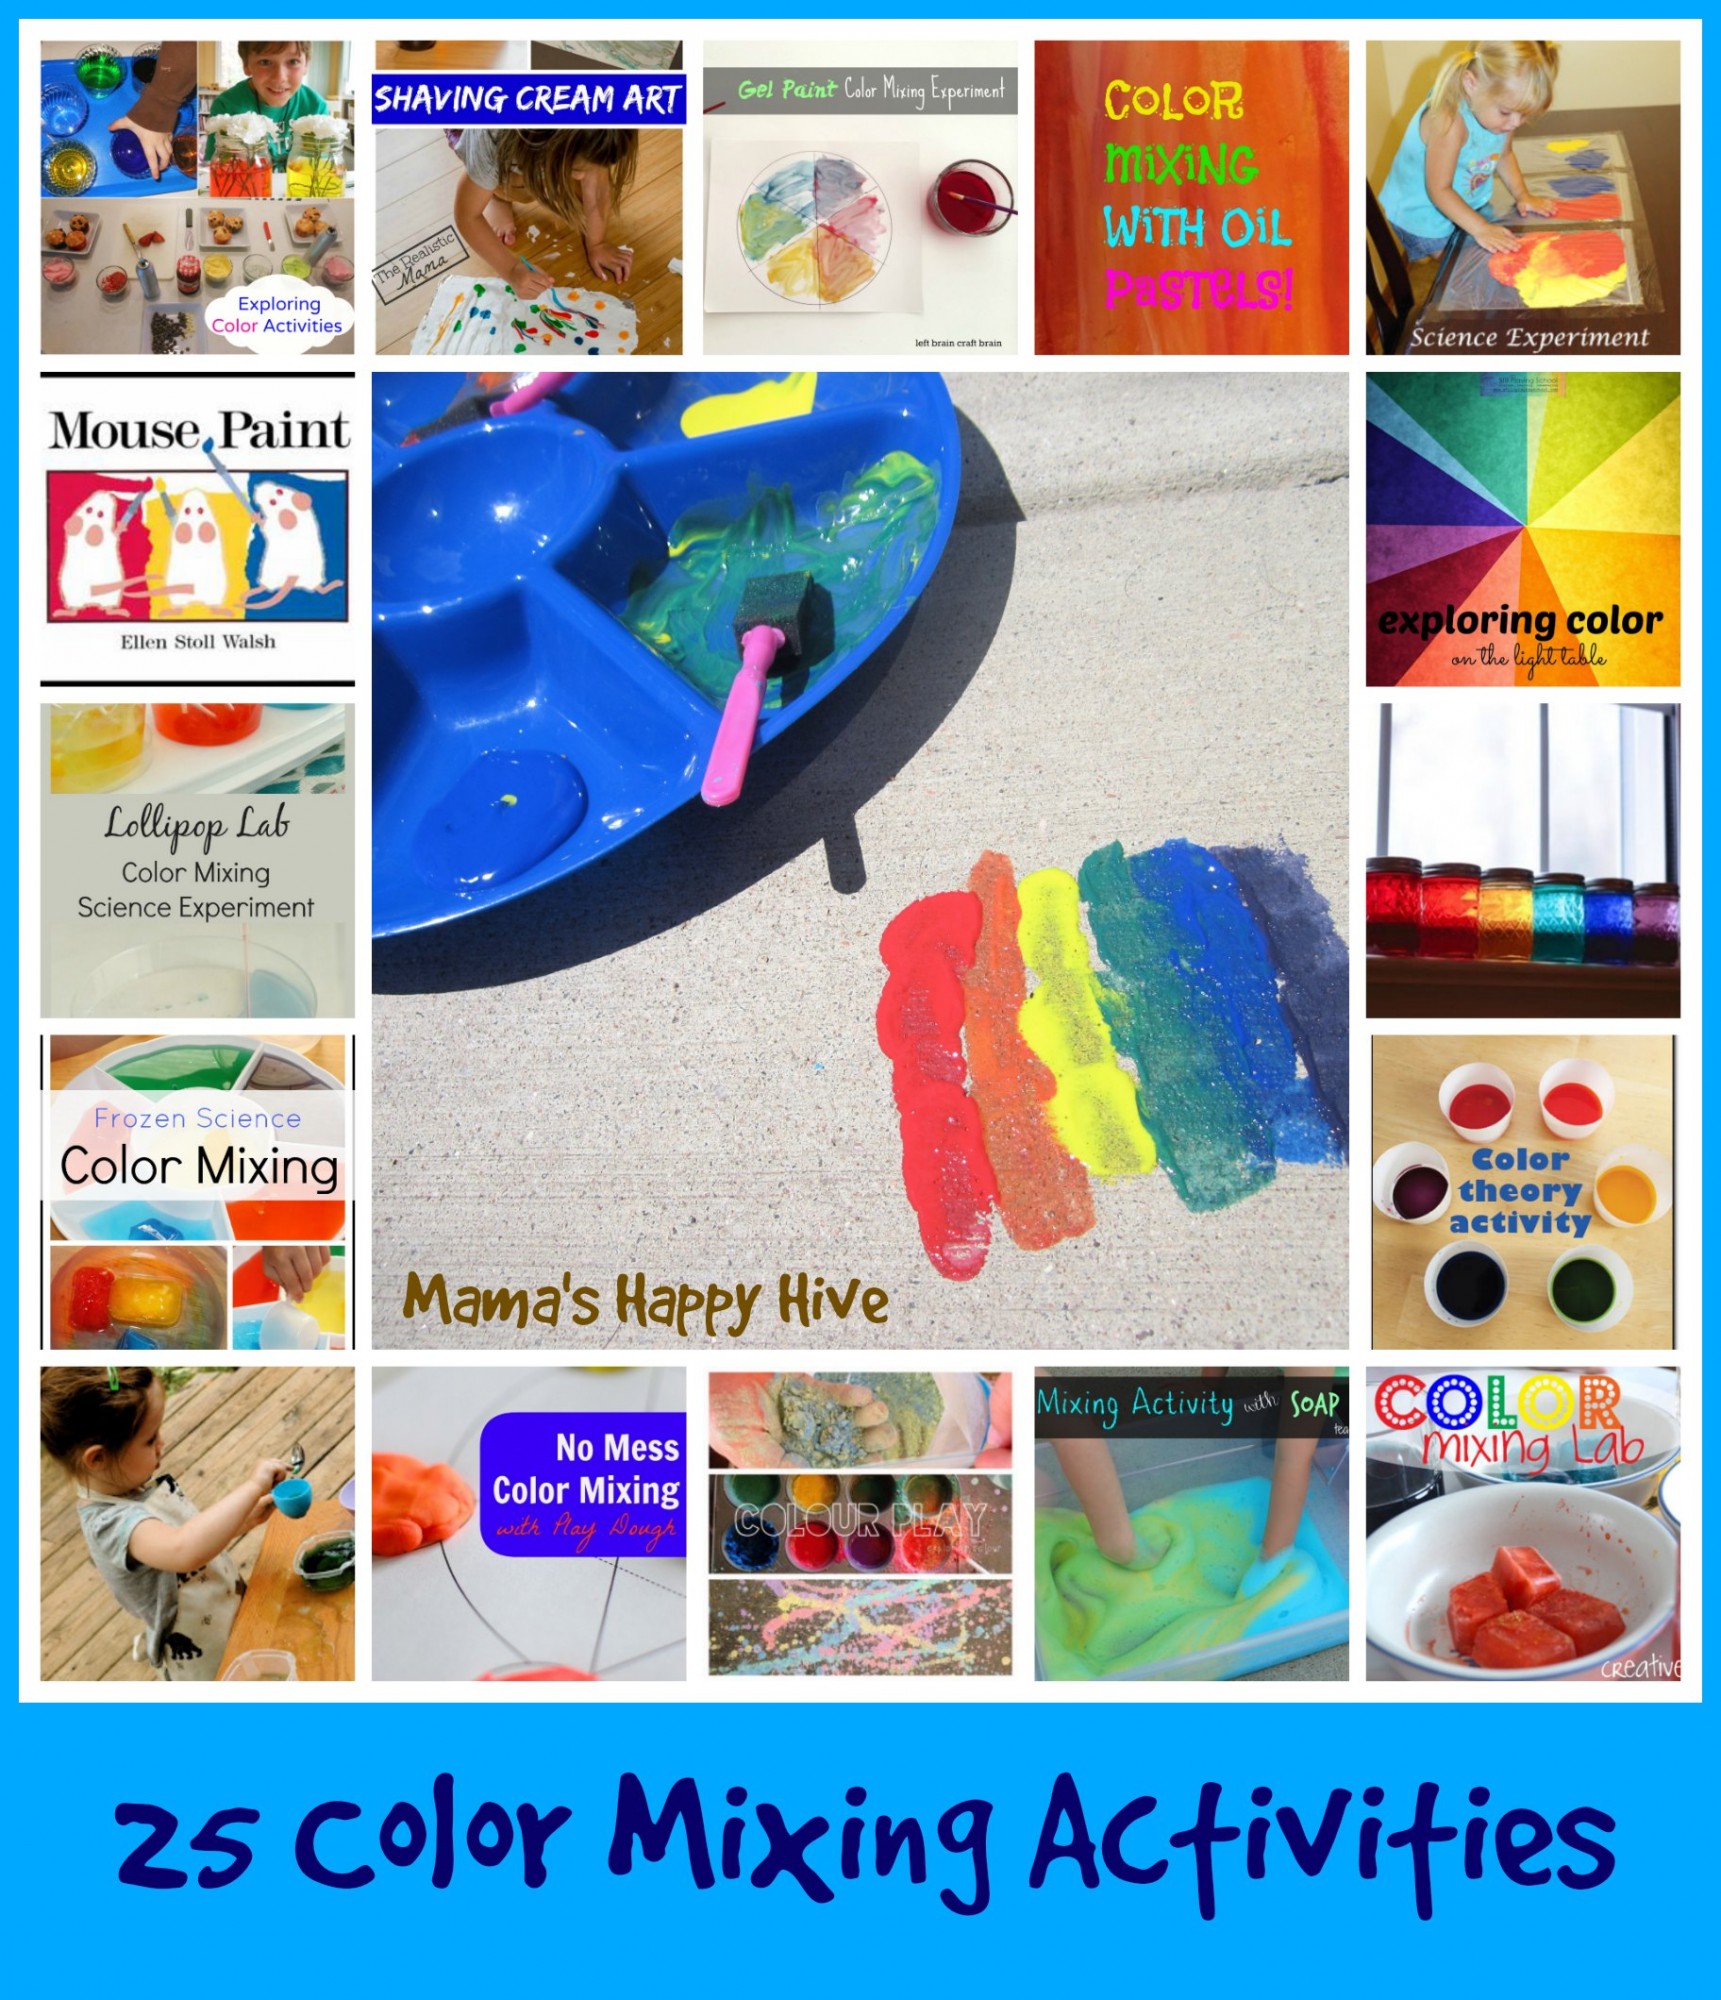 25 Color Mixing Activities at www.mamashappyhive.com